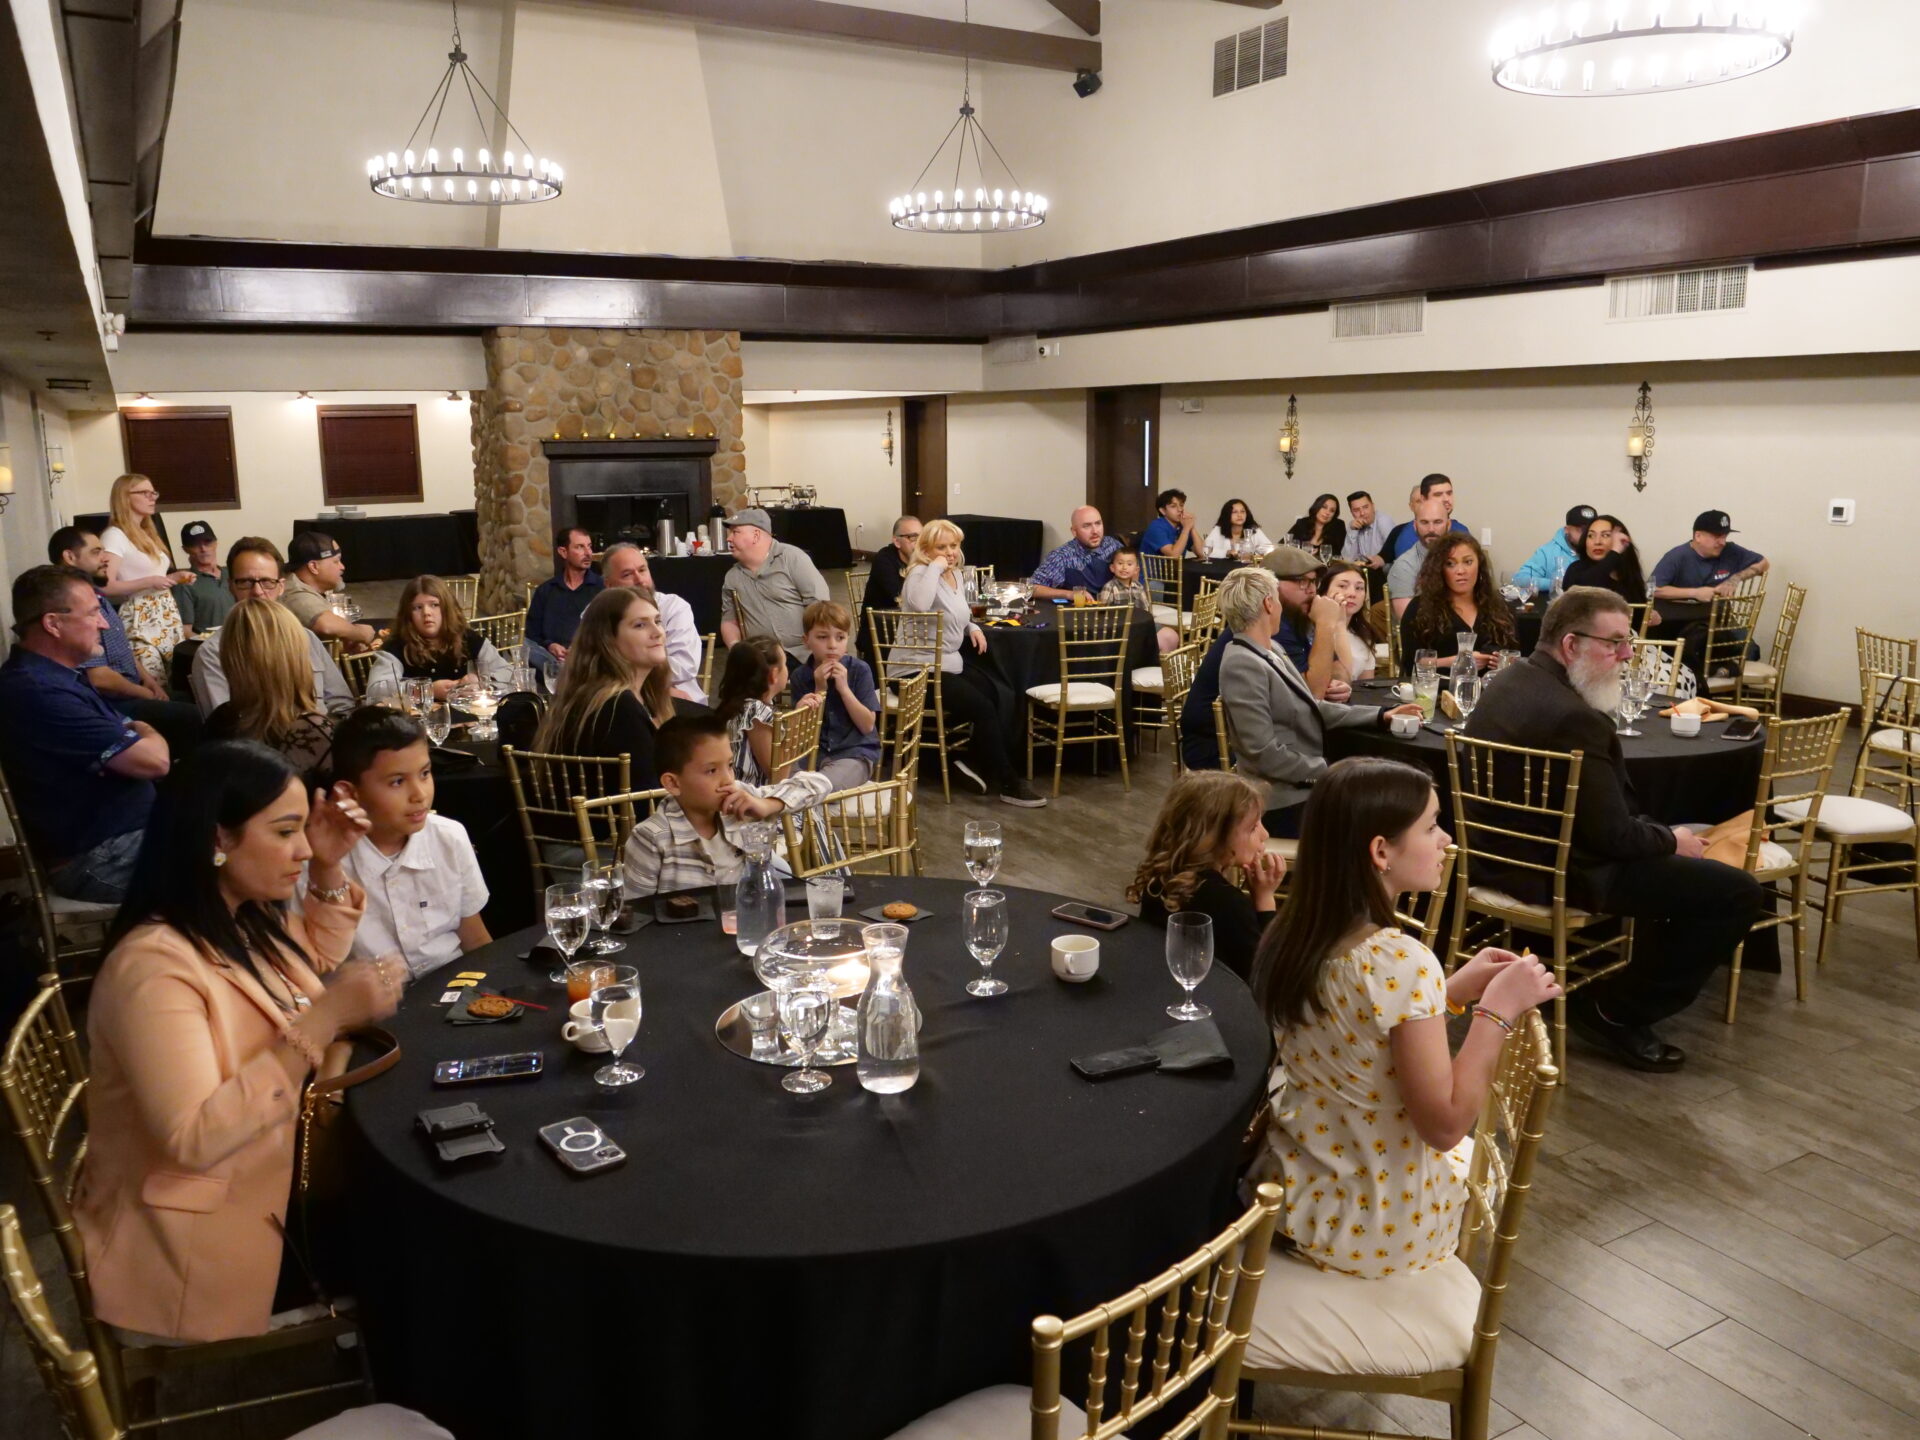 Image from the Gallery: VAC Banquet – Henderson, NV